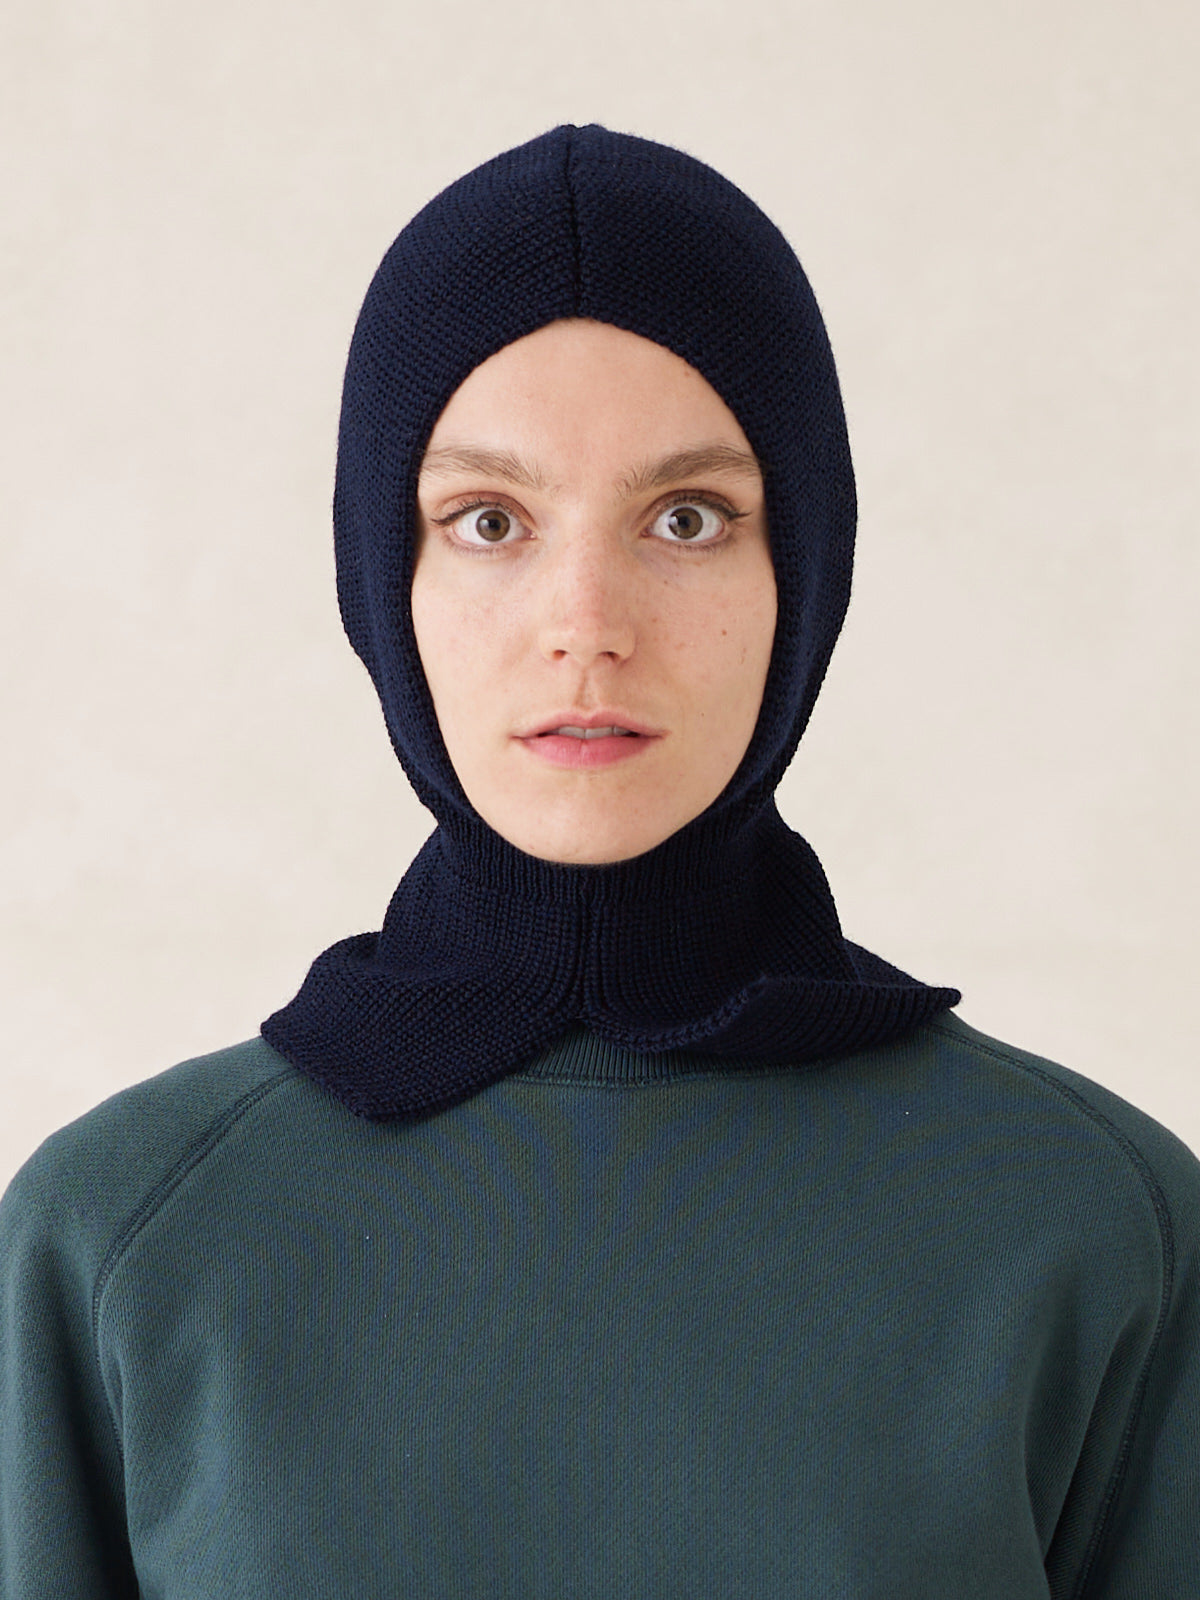 00 / Knitted Hood